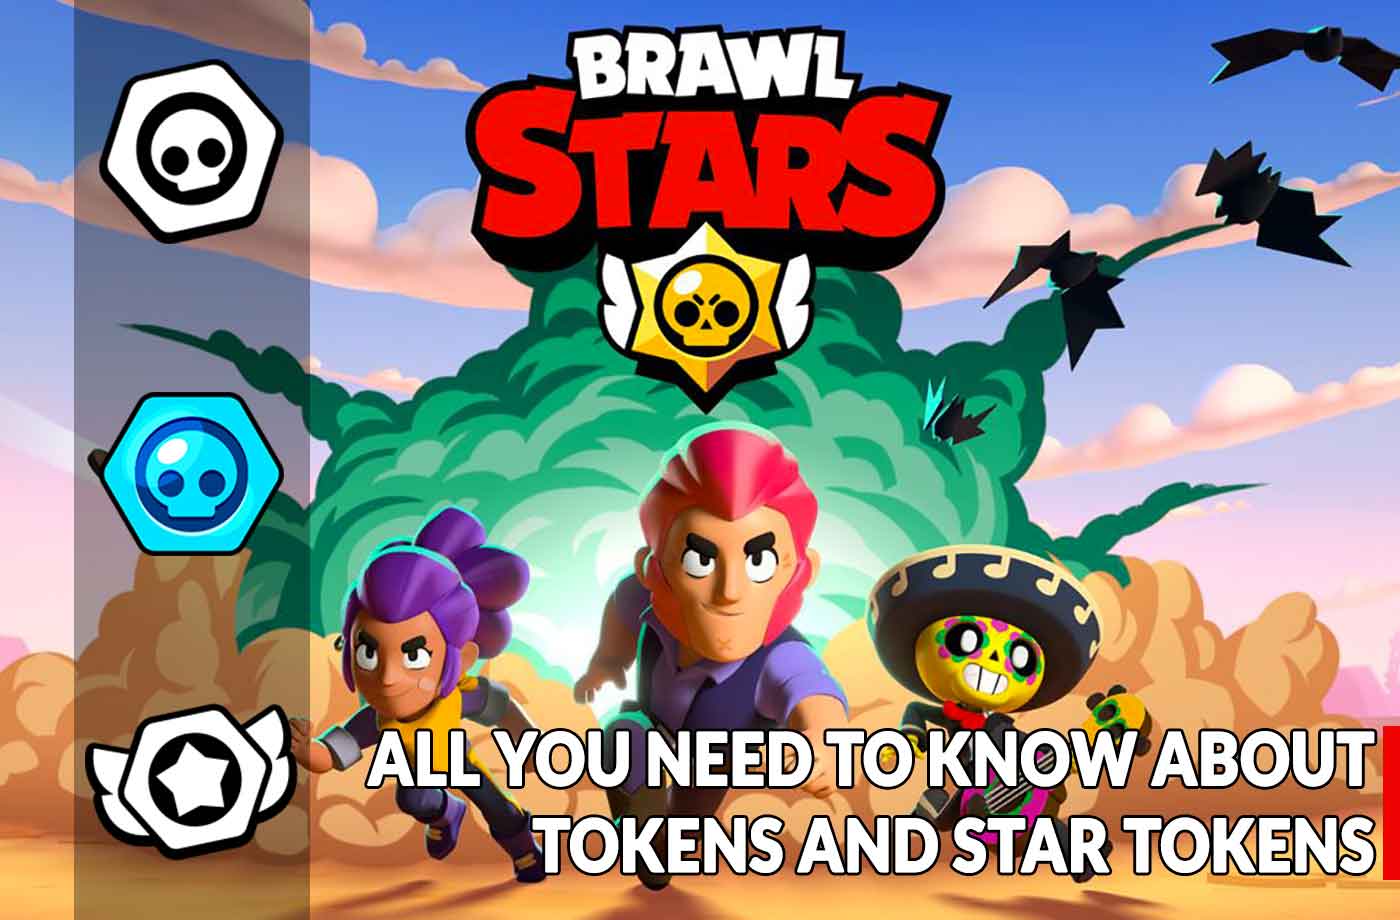 Guide Brawl Stars How To Quickly Gain Tokens And Star Tokens Kill The Game - brawl stars trophy gainb